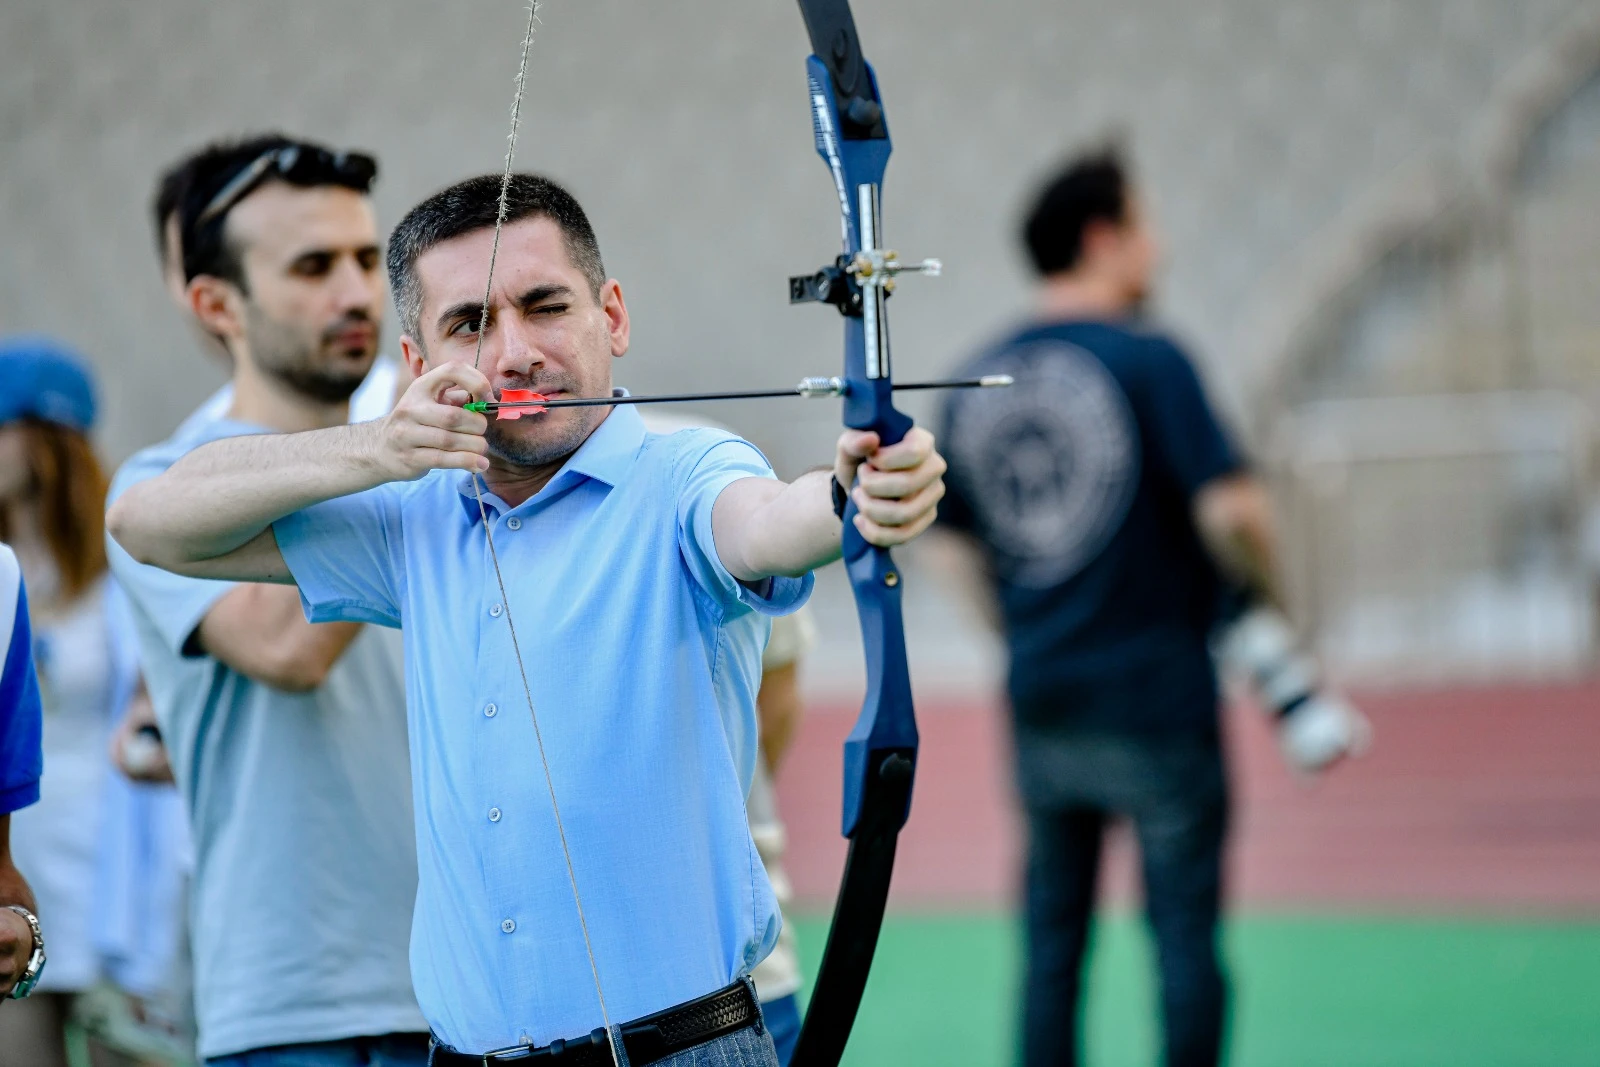 The Committee participated in the archery competition